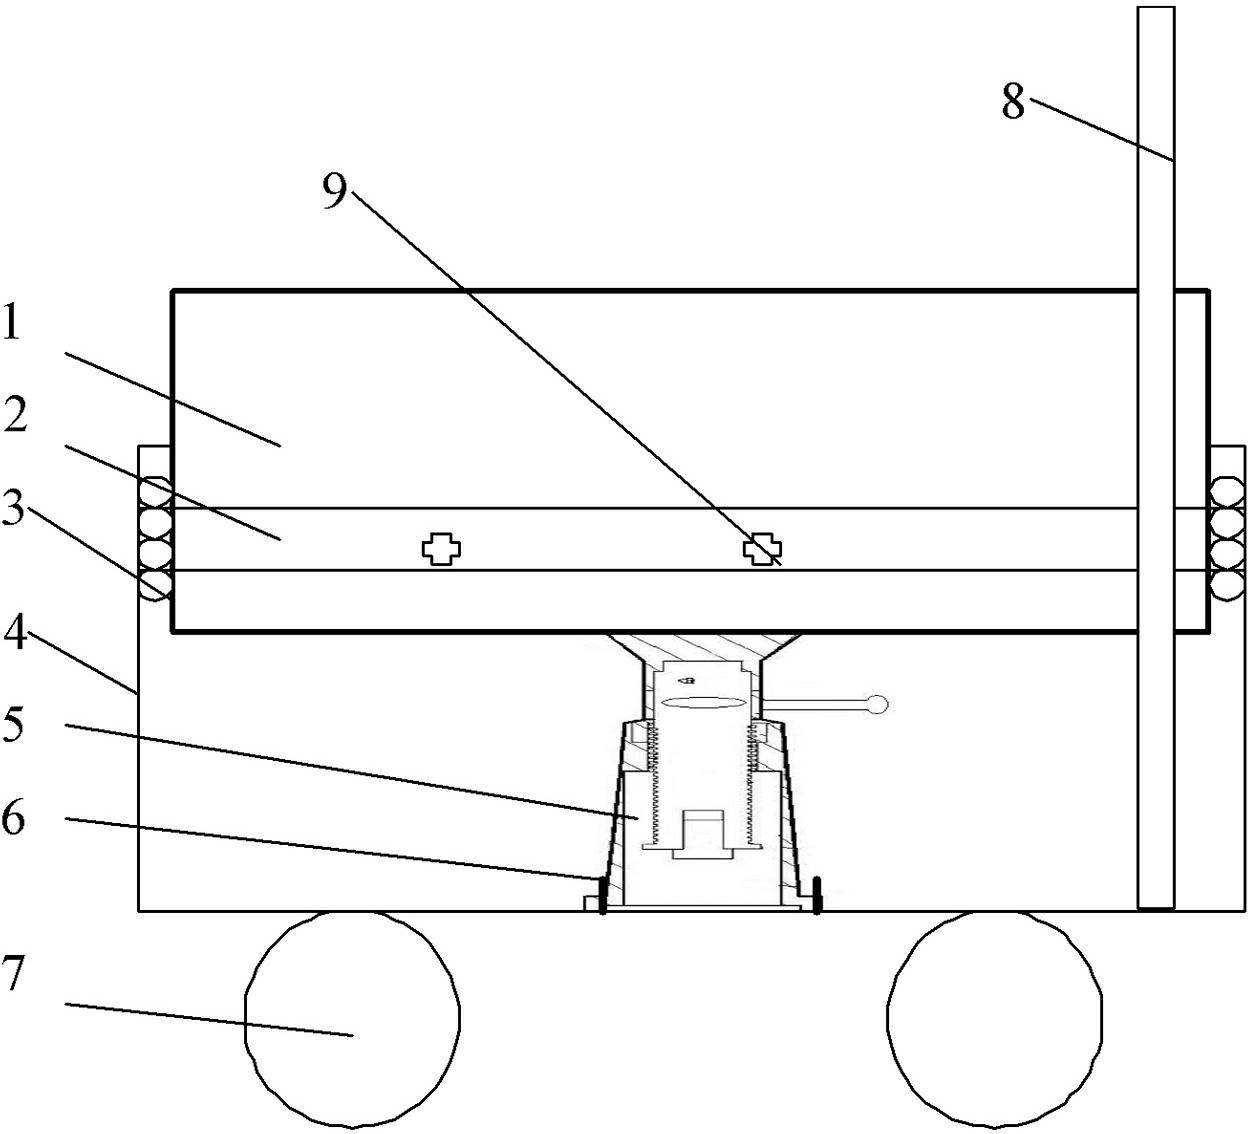 Loading and unloading vehicle suitable for rapidly replacing battery box of pure electric vehicle